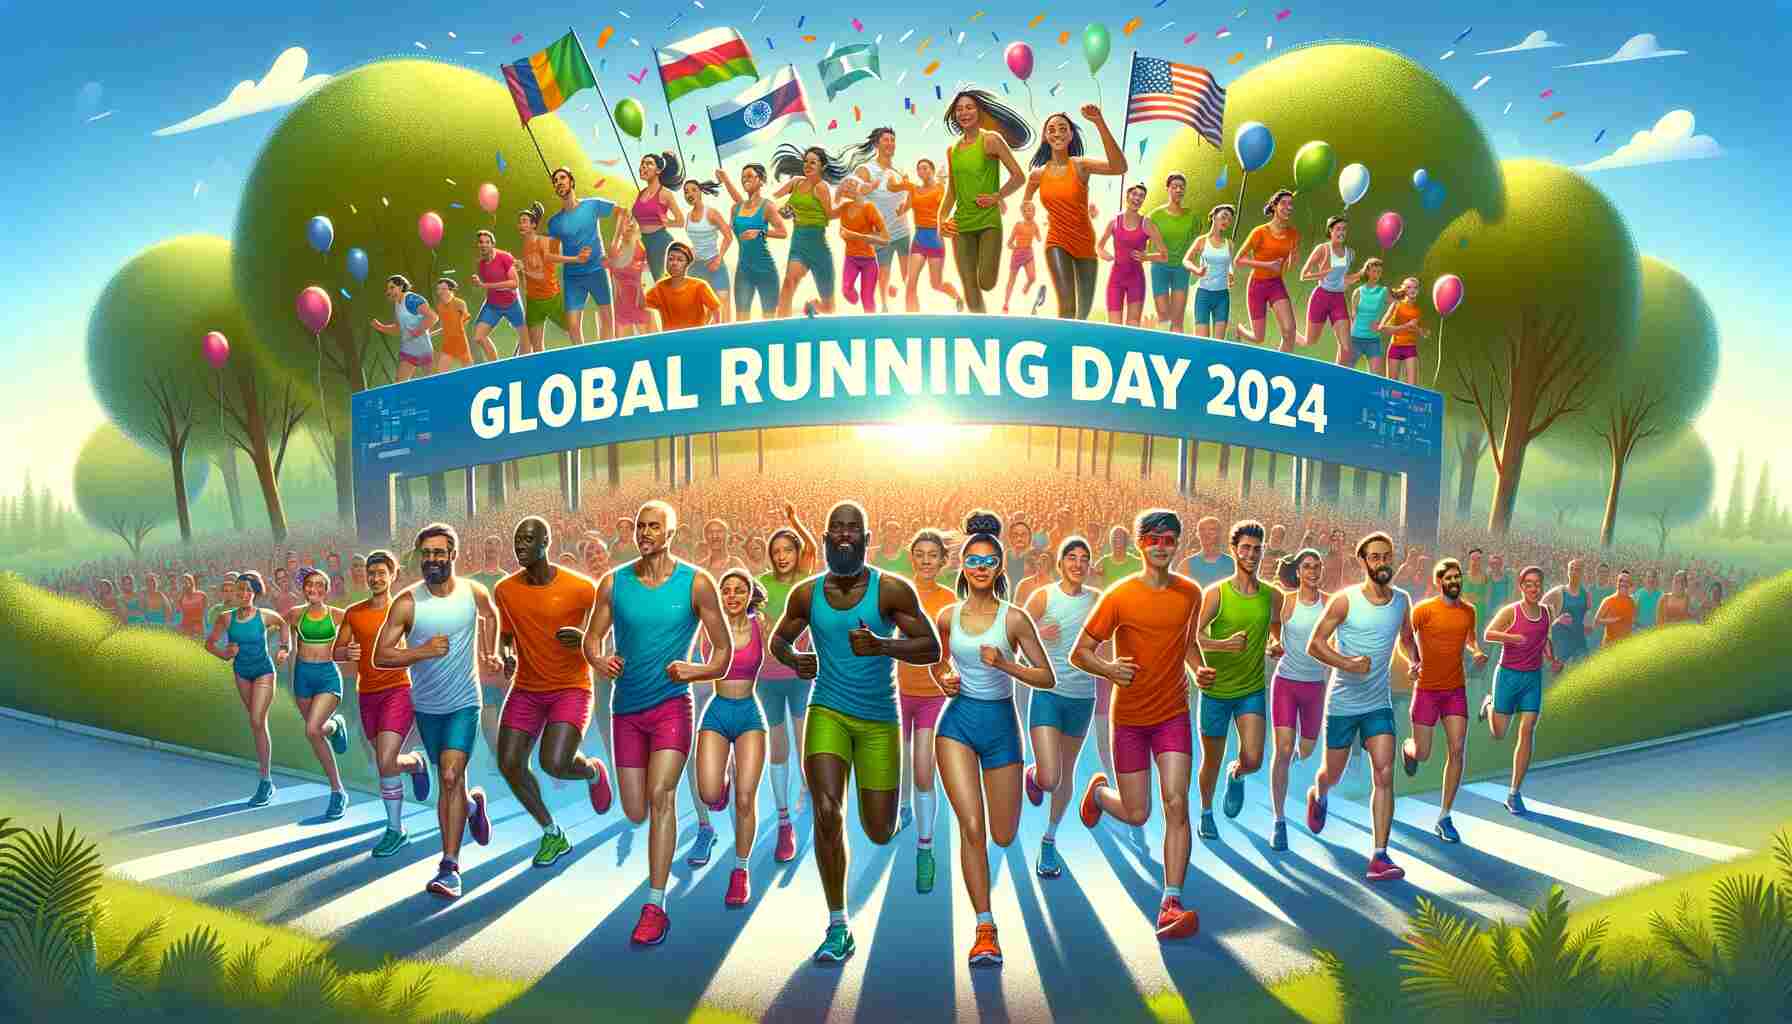 Celebration of Global Running Day 2024 with a diverse group of runners, including men, women, and children, running in a park with a banner reading 'Global Running Day 2024'. The festive atmosphere includes balloons, confetti, and flags from various countries.